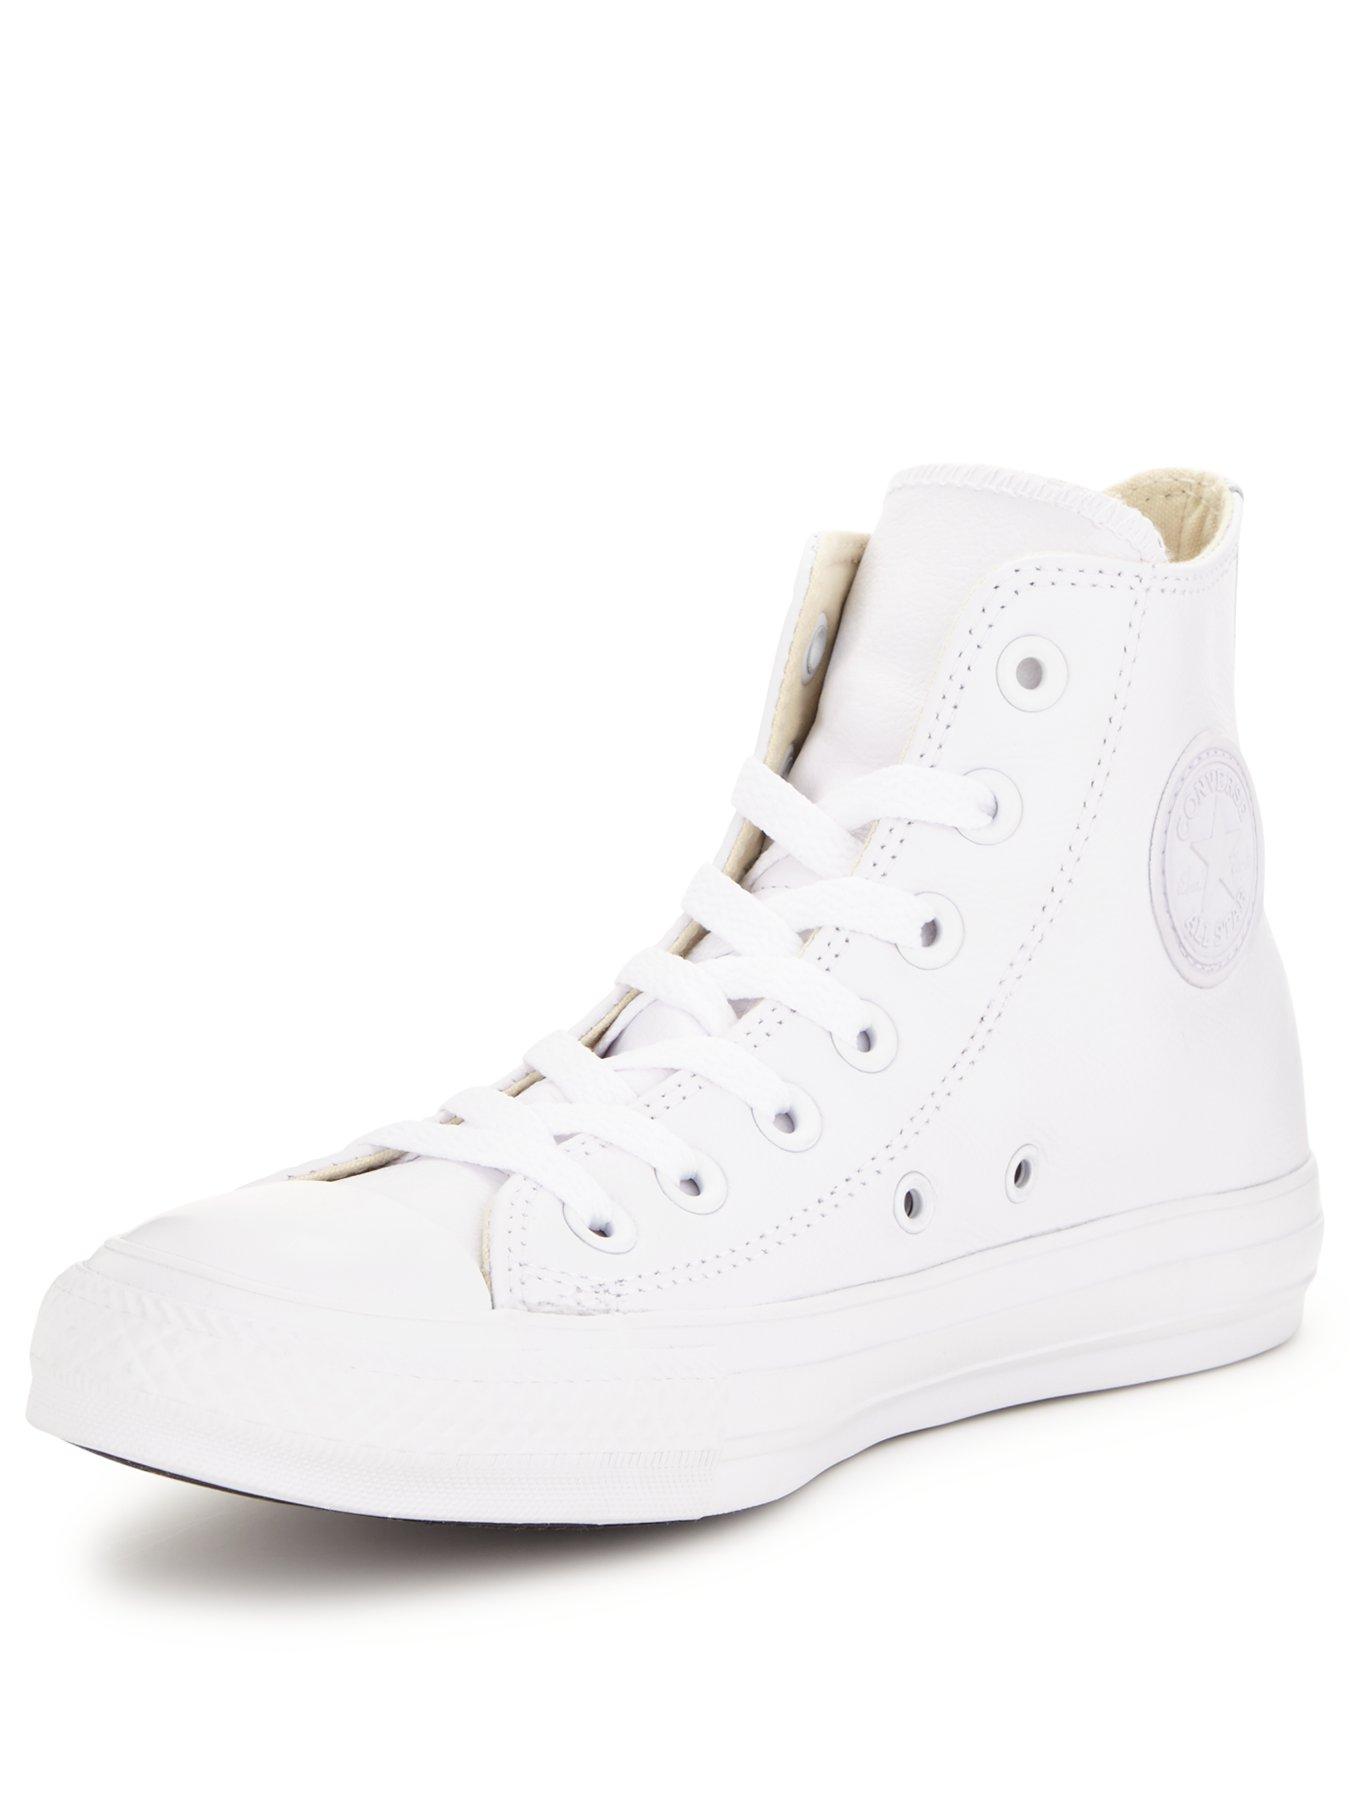 converse high leather white